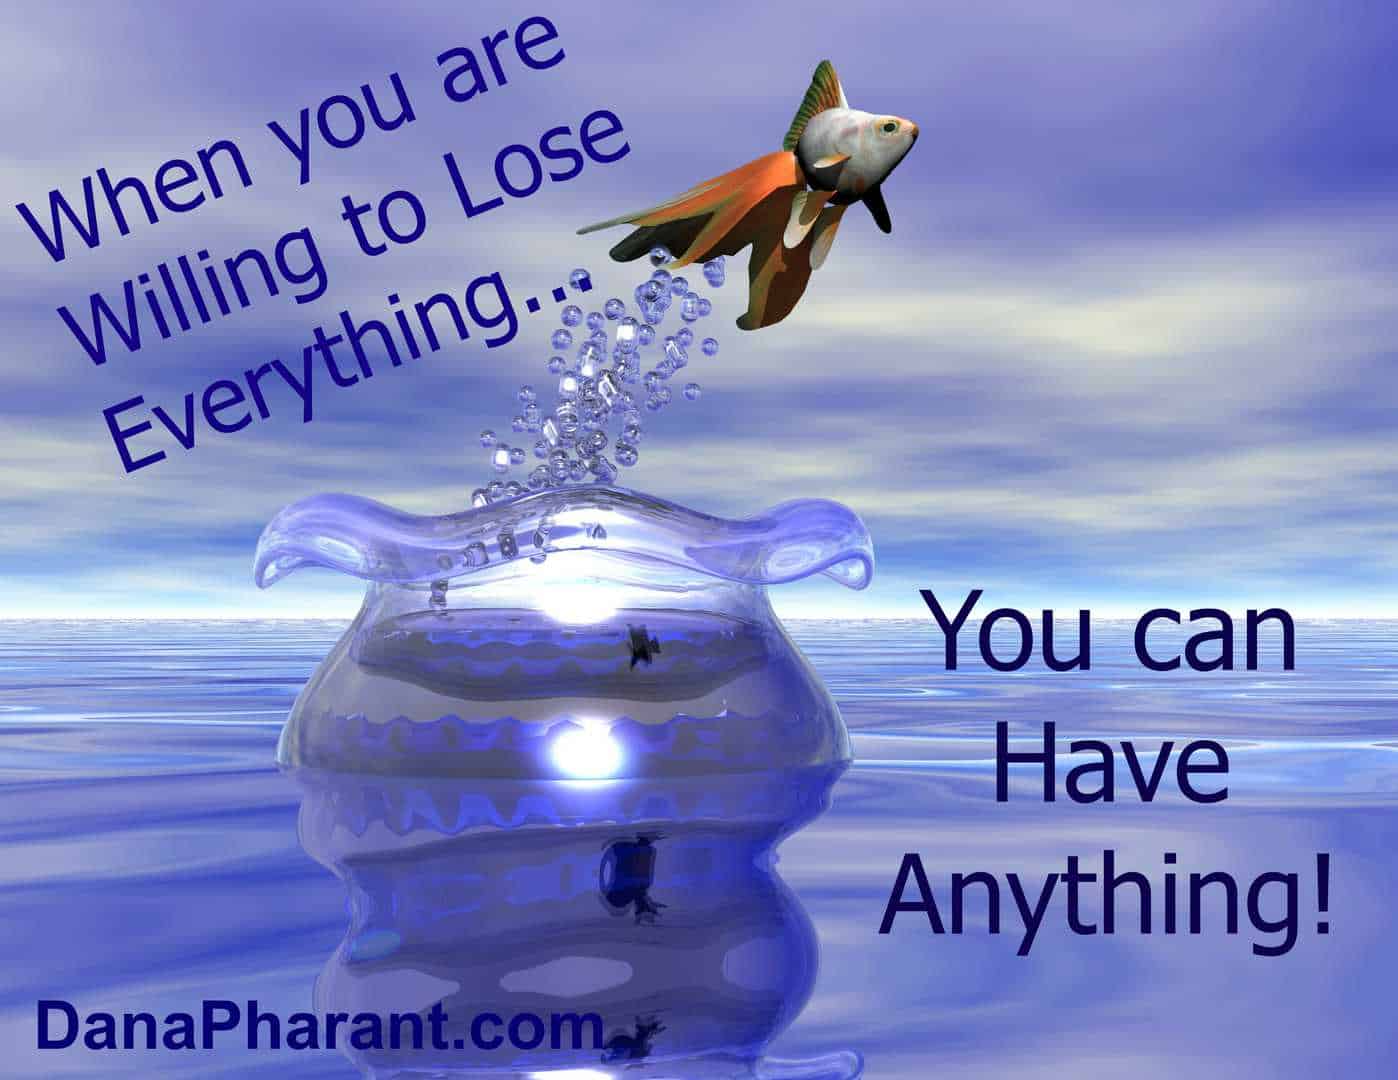 when you are willing to lose everything - you can have anything